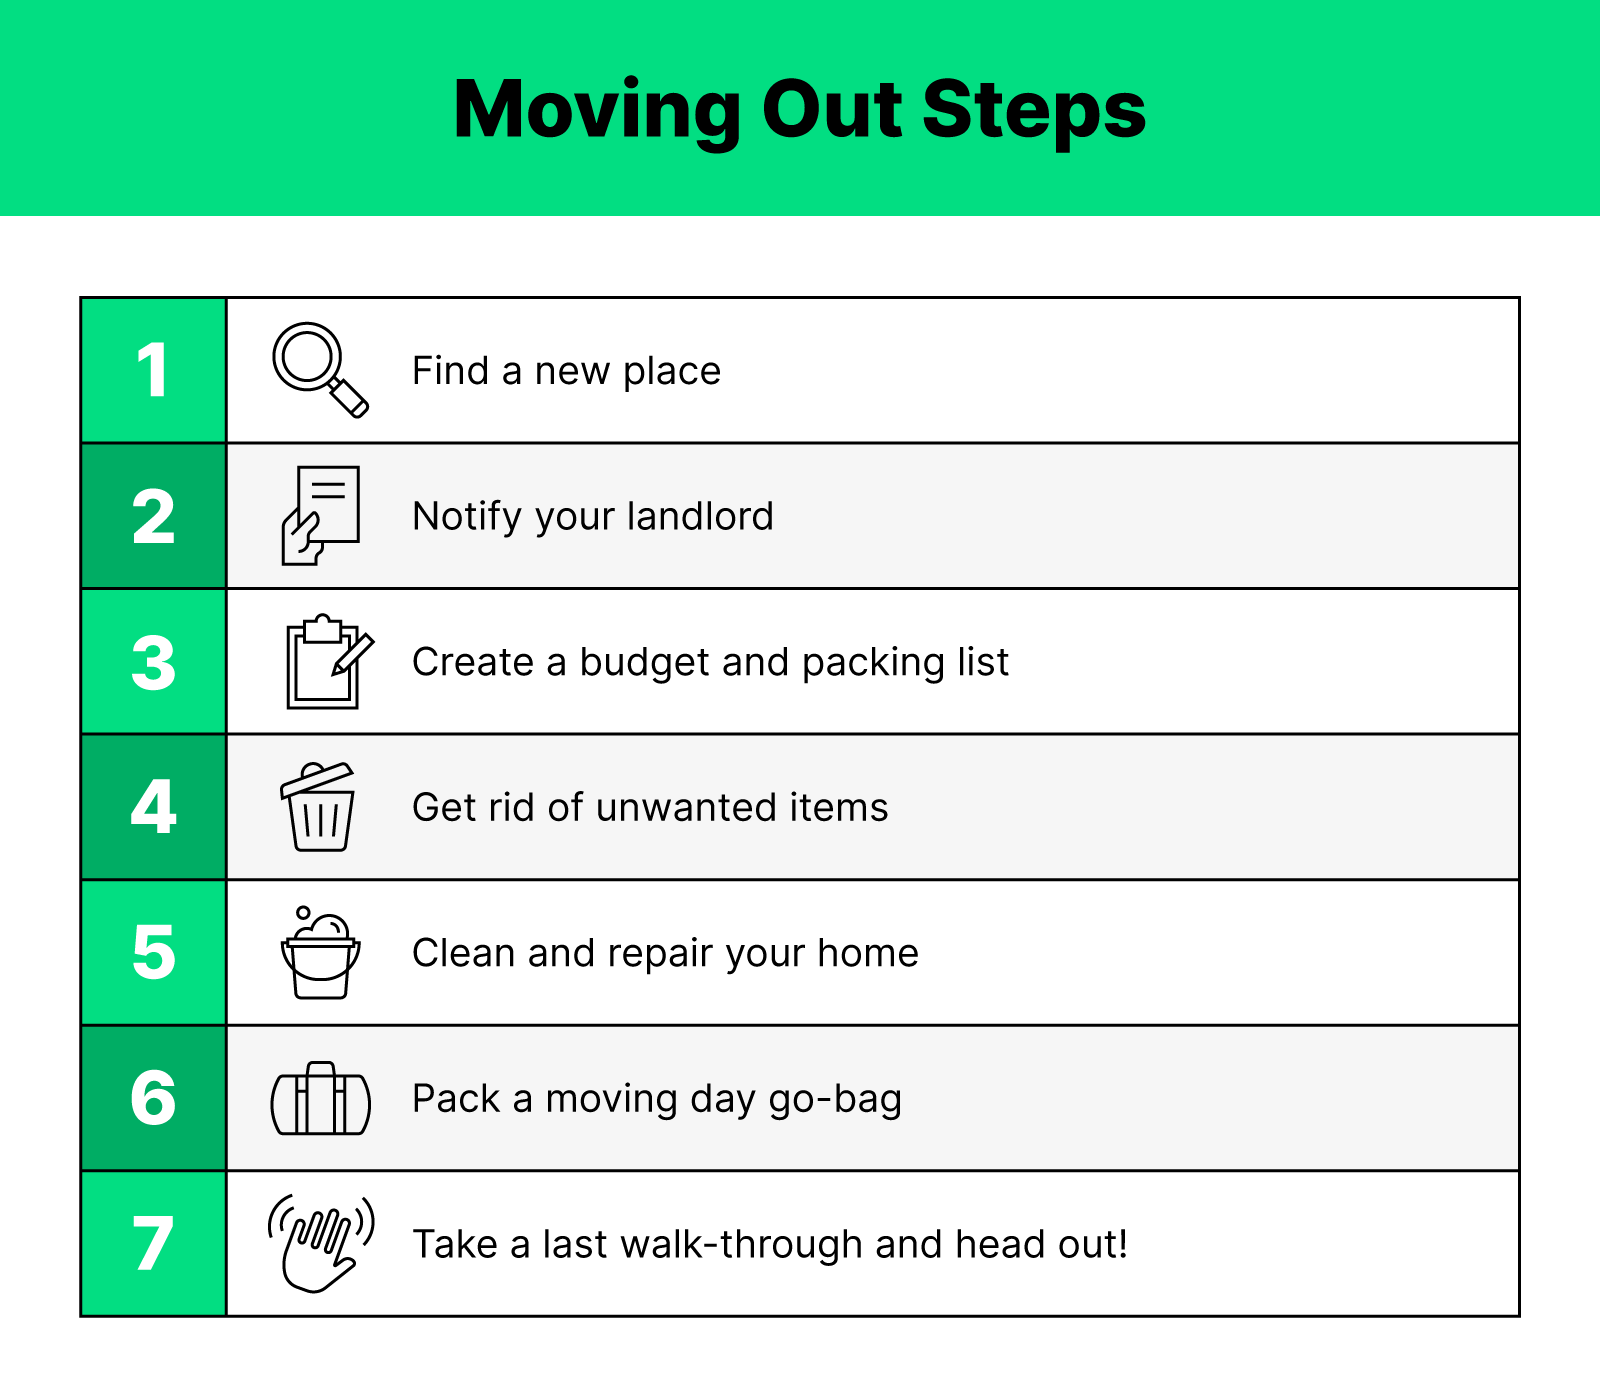 Checklist Of Things To Do After Moving